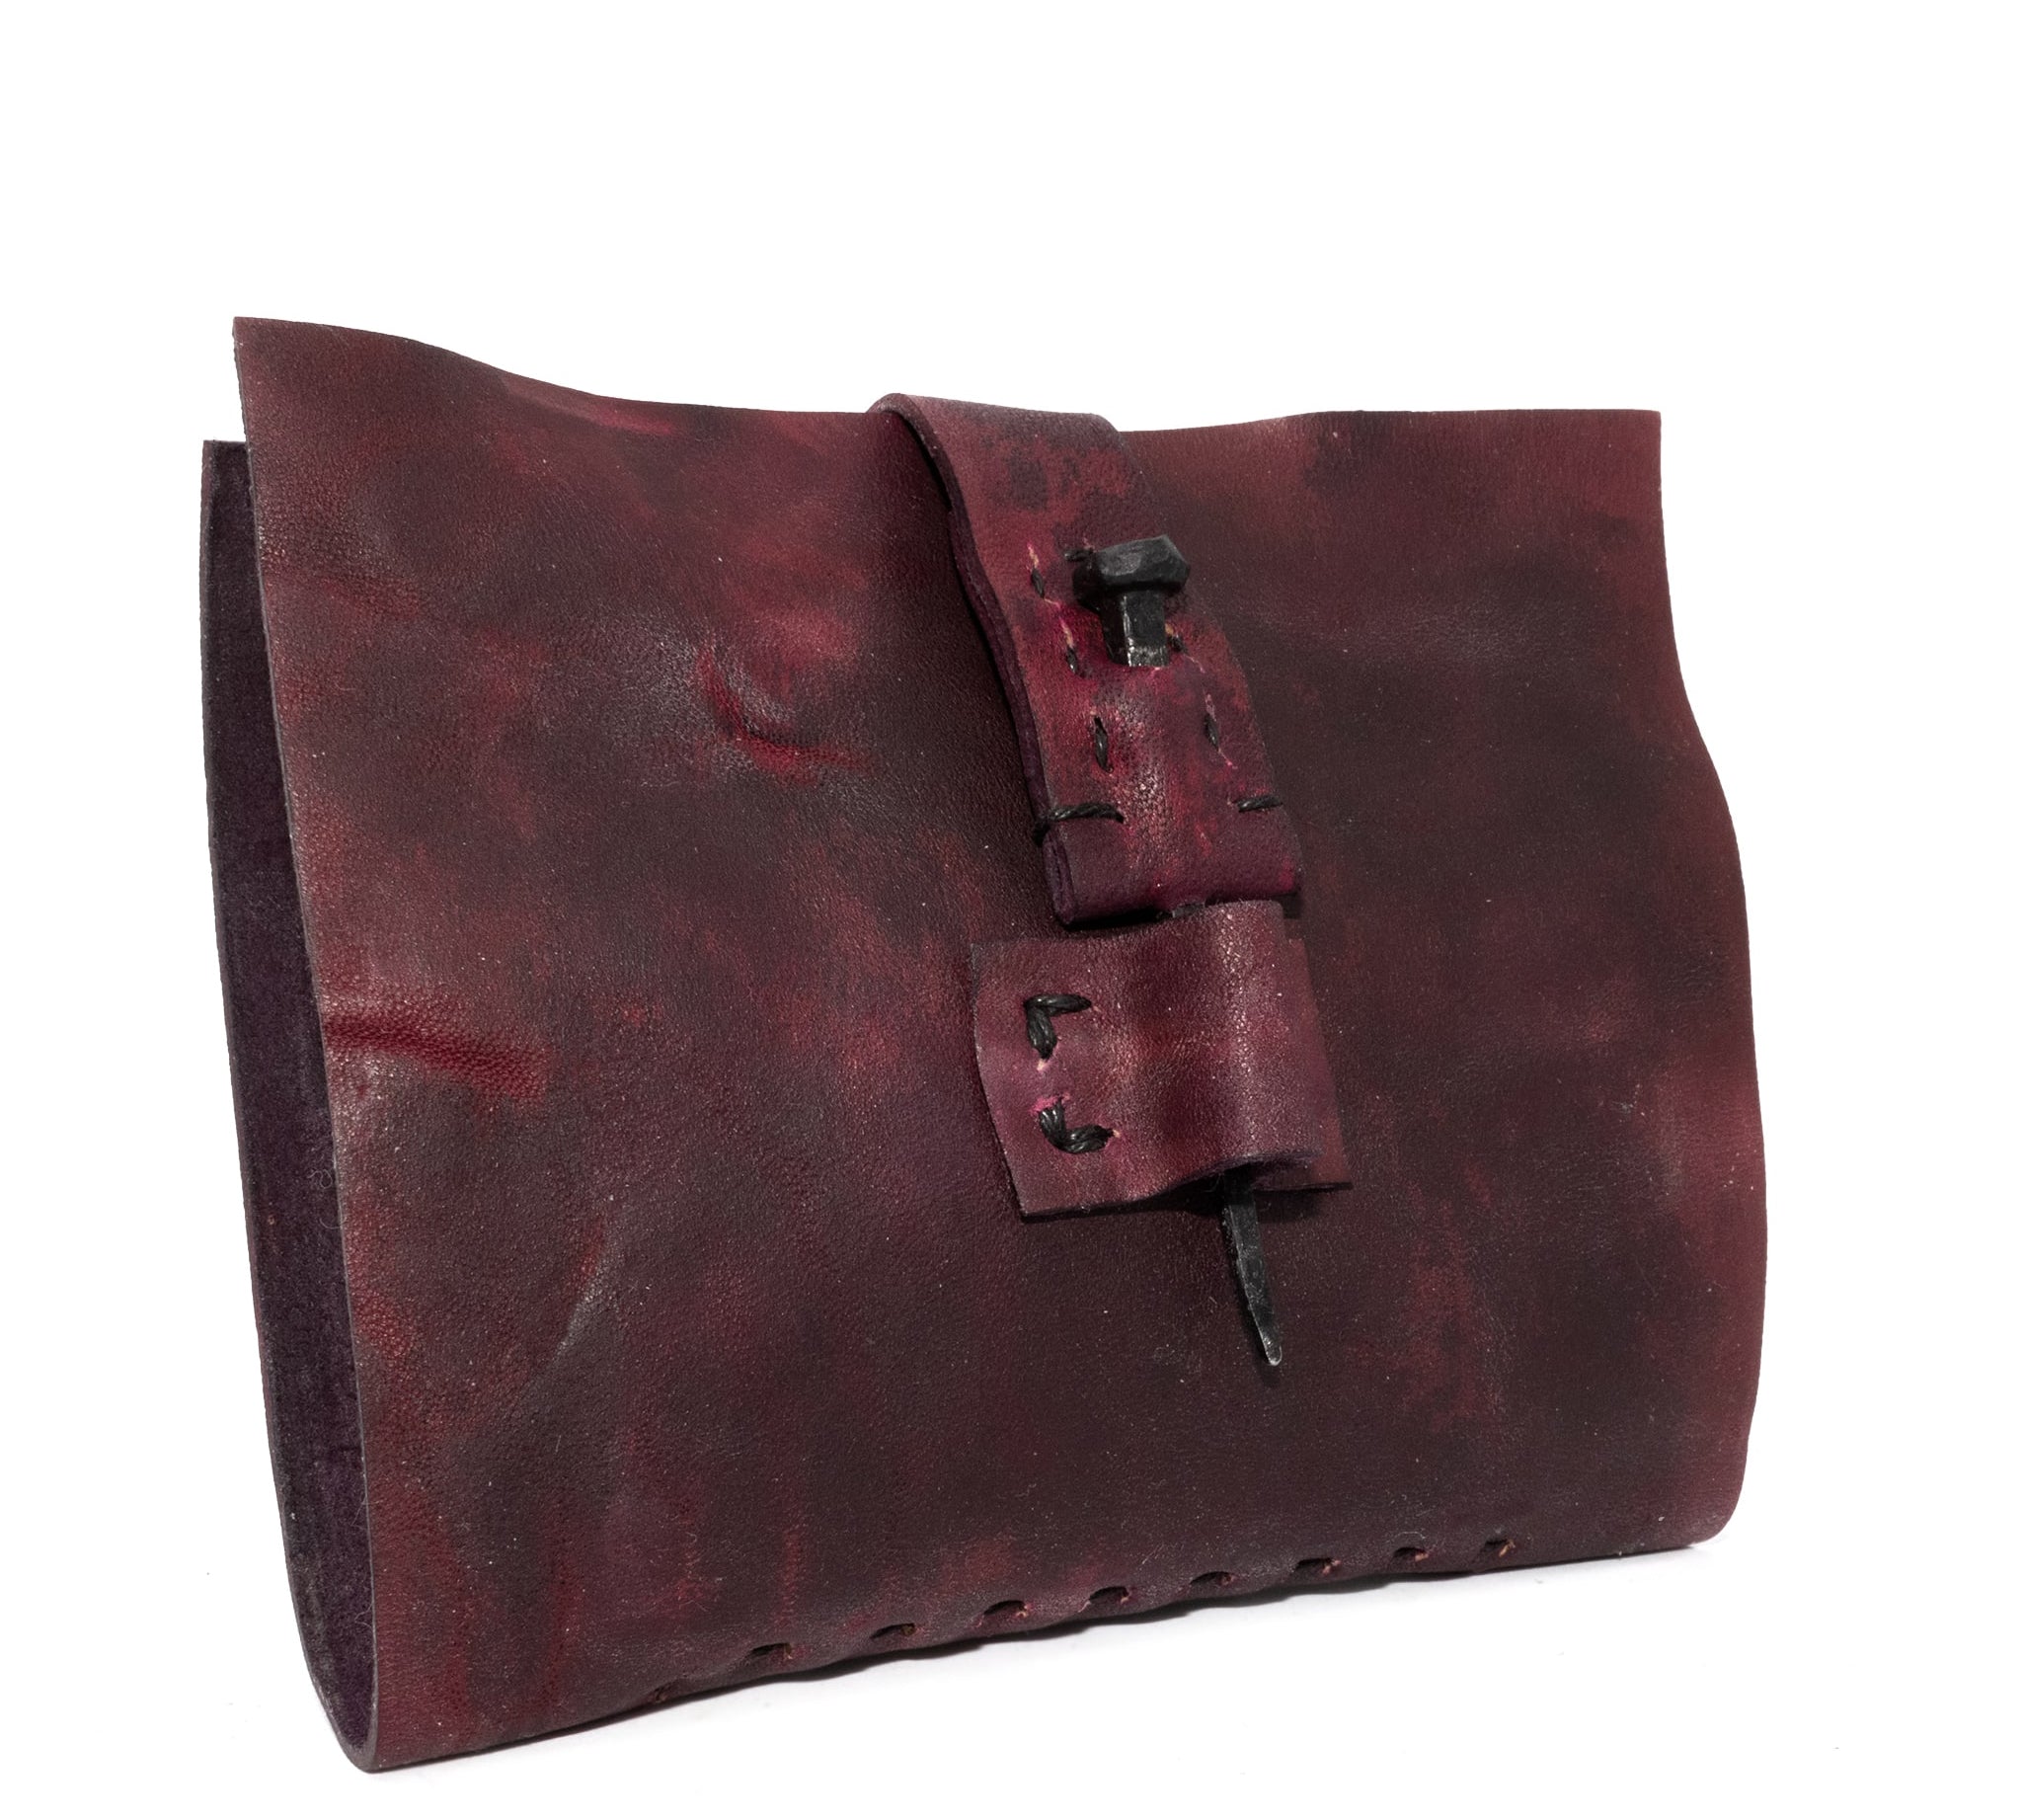 avant garde hand dyed leather wallets from atelier skn